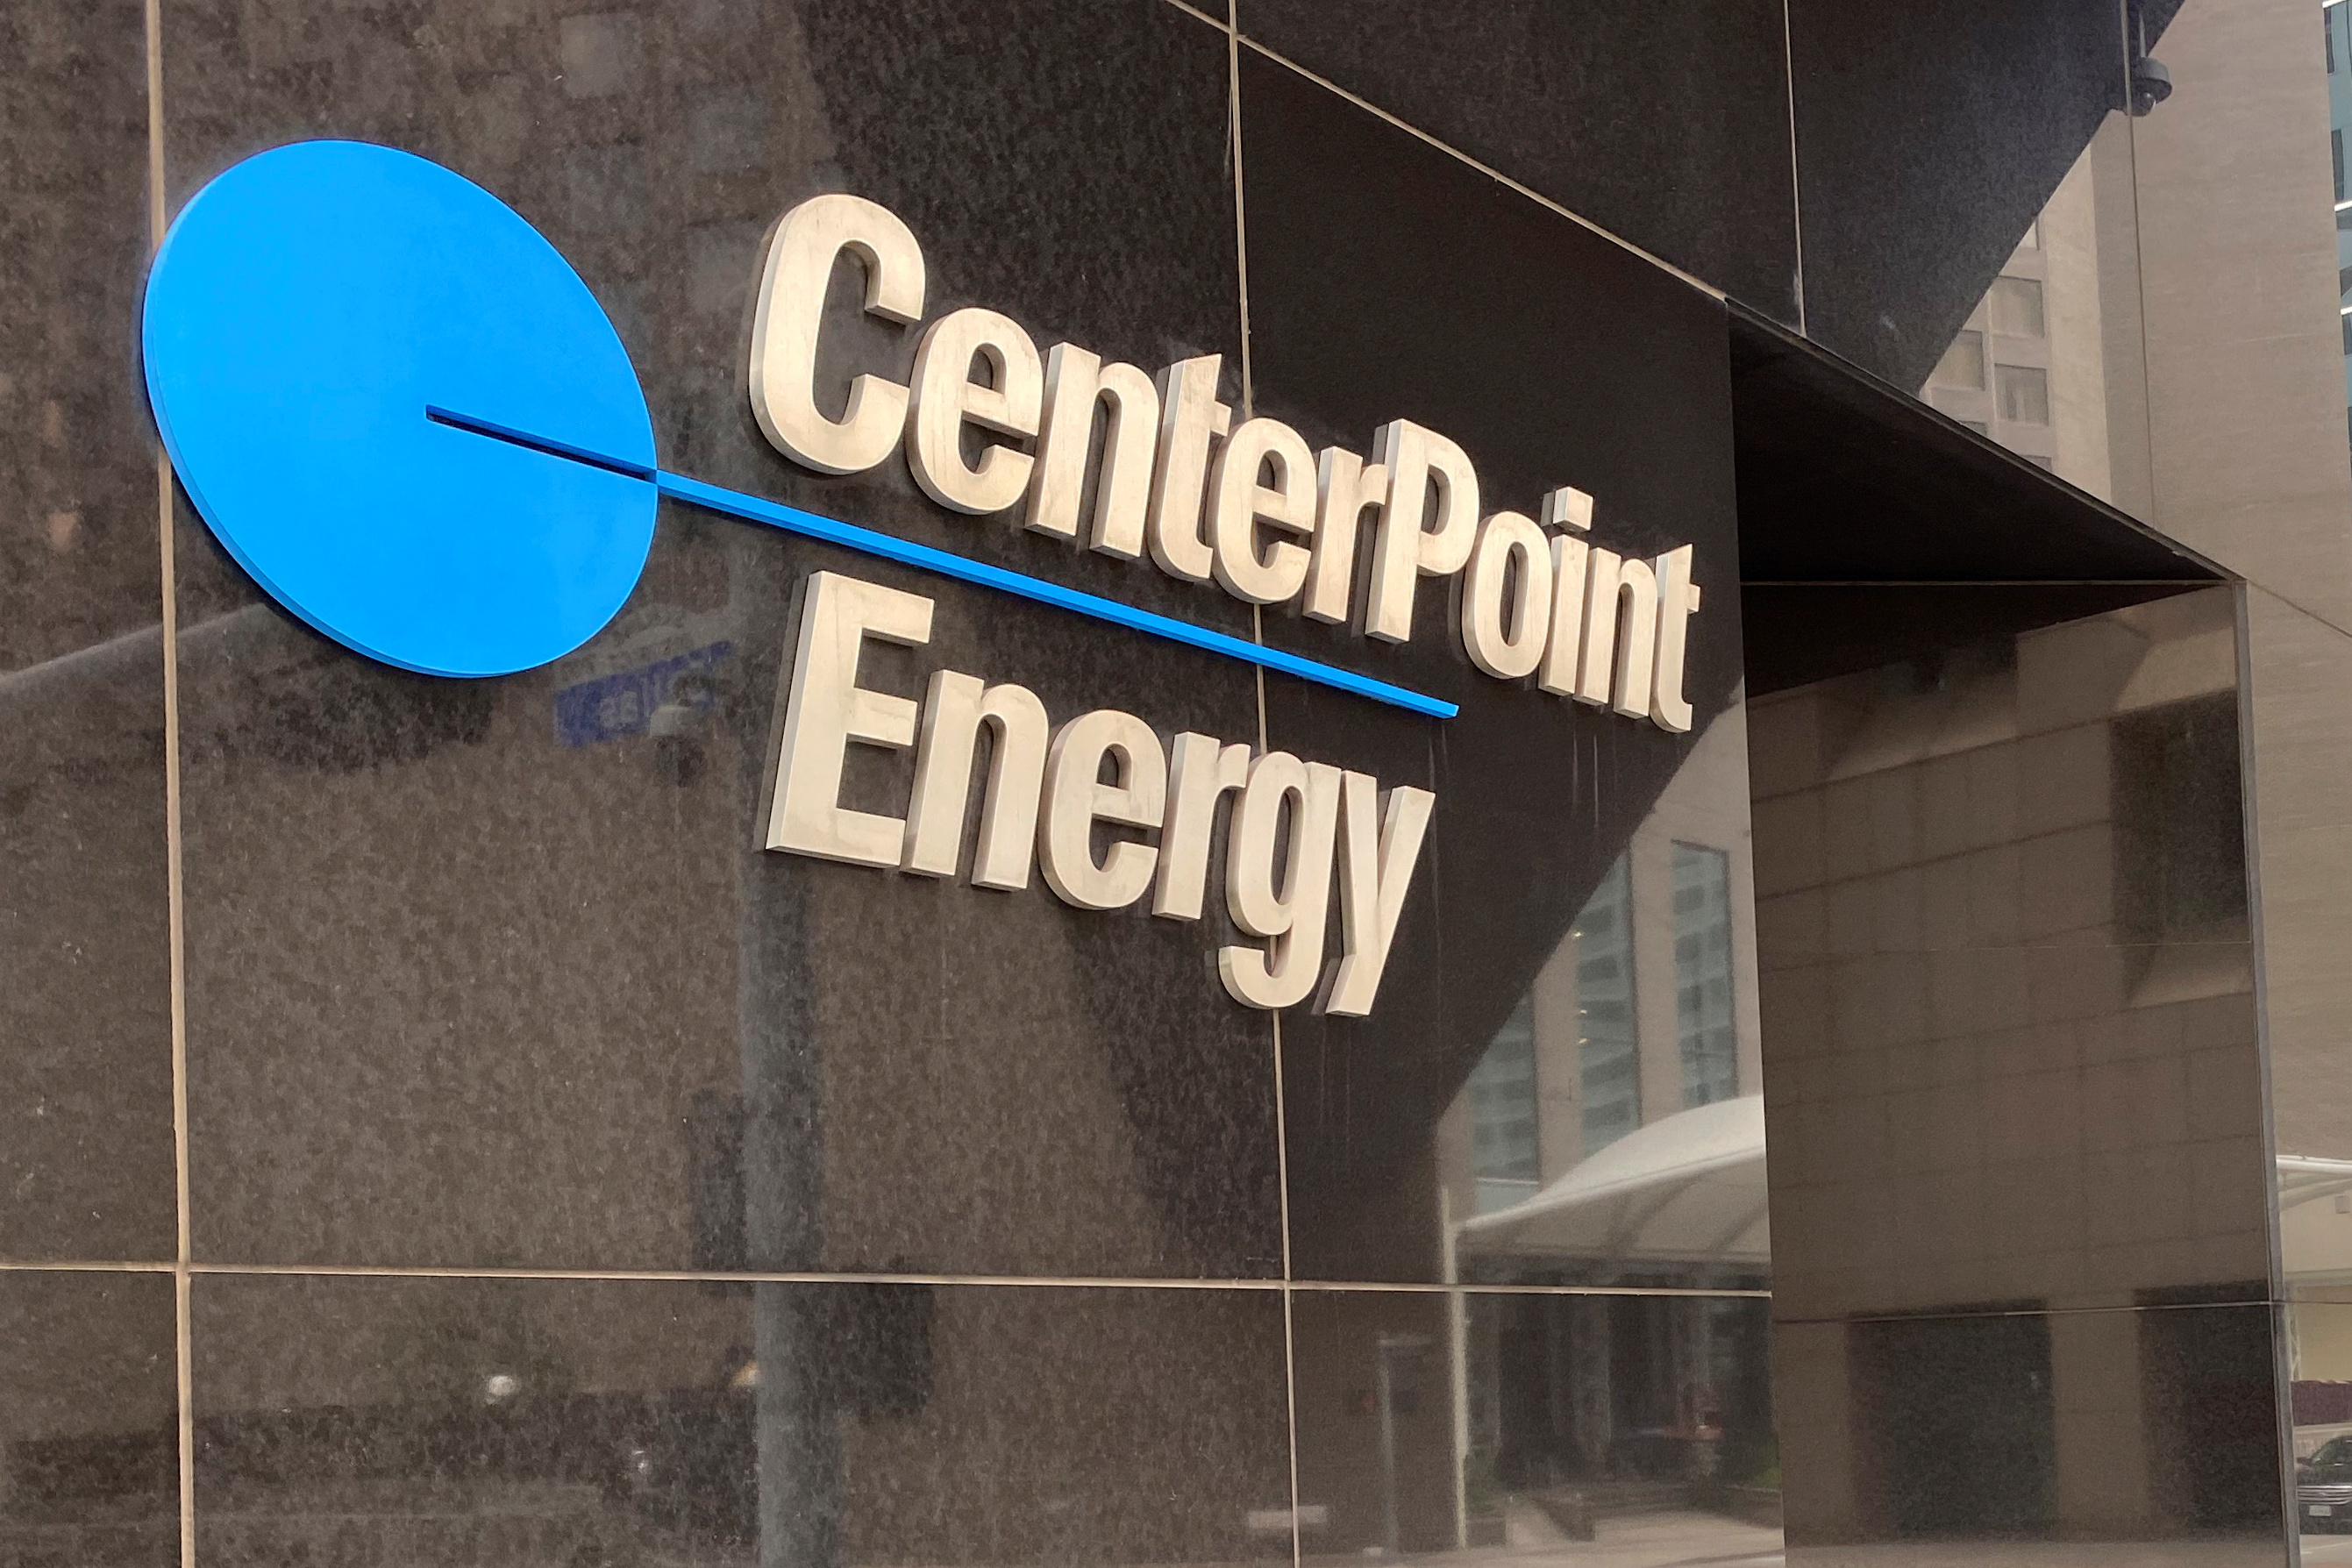 The headquarters of natural gas and power utility CenterPoint Energy is seen in Houston